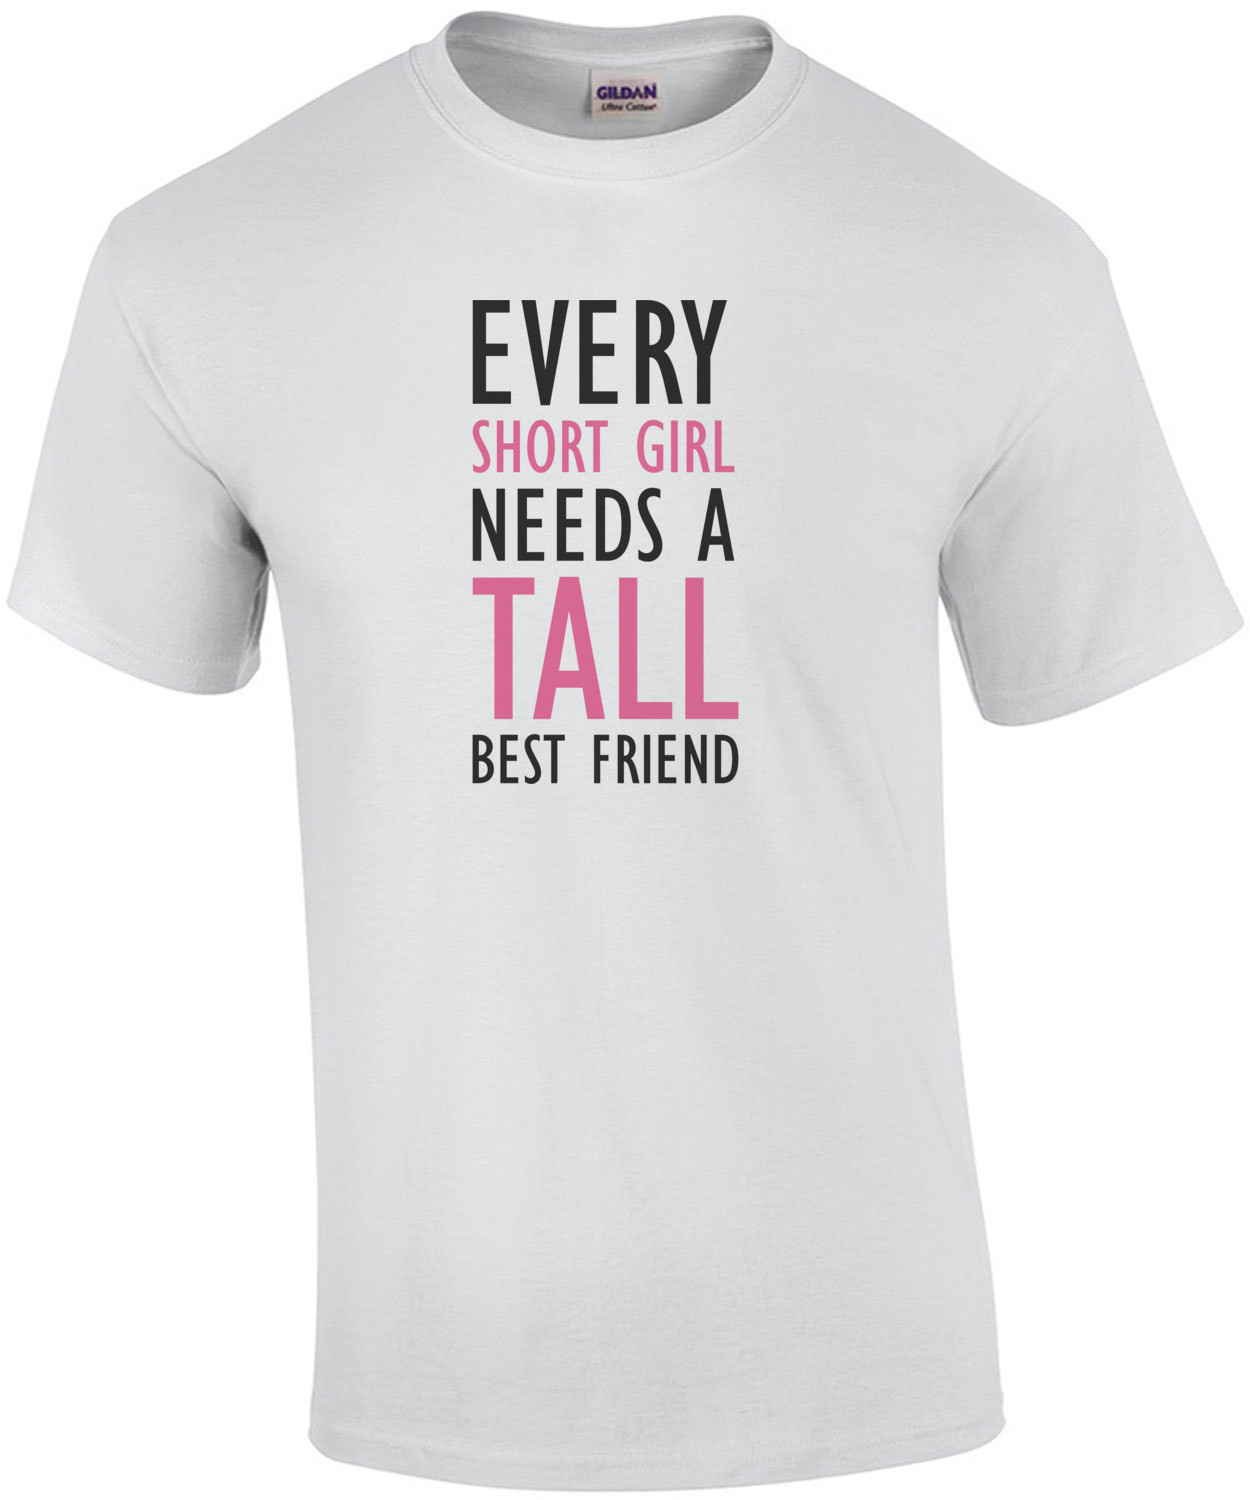 Every short girl need a tall best friend - ladies t-shirt